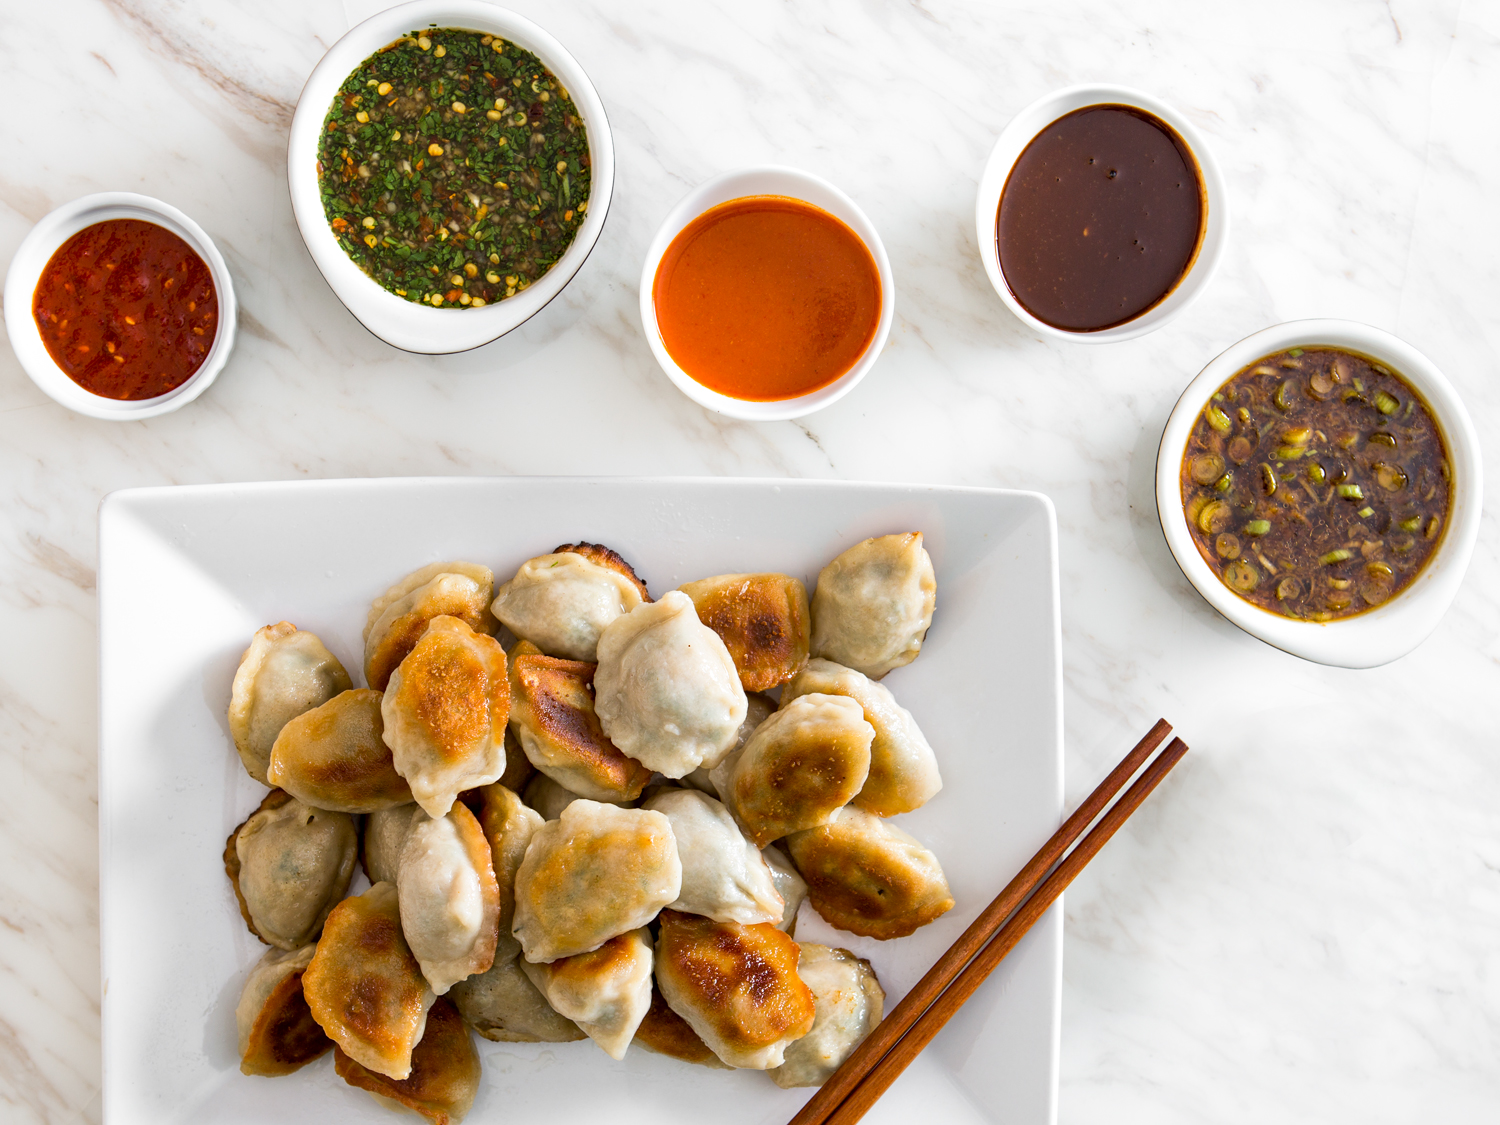 🥡 Order Some Chinese Food and We’ll Reveal What Your Fortune Cookie Says 🥠 dipping dumplings in sauce